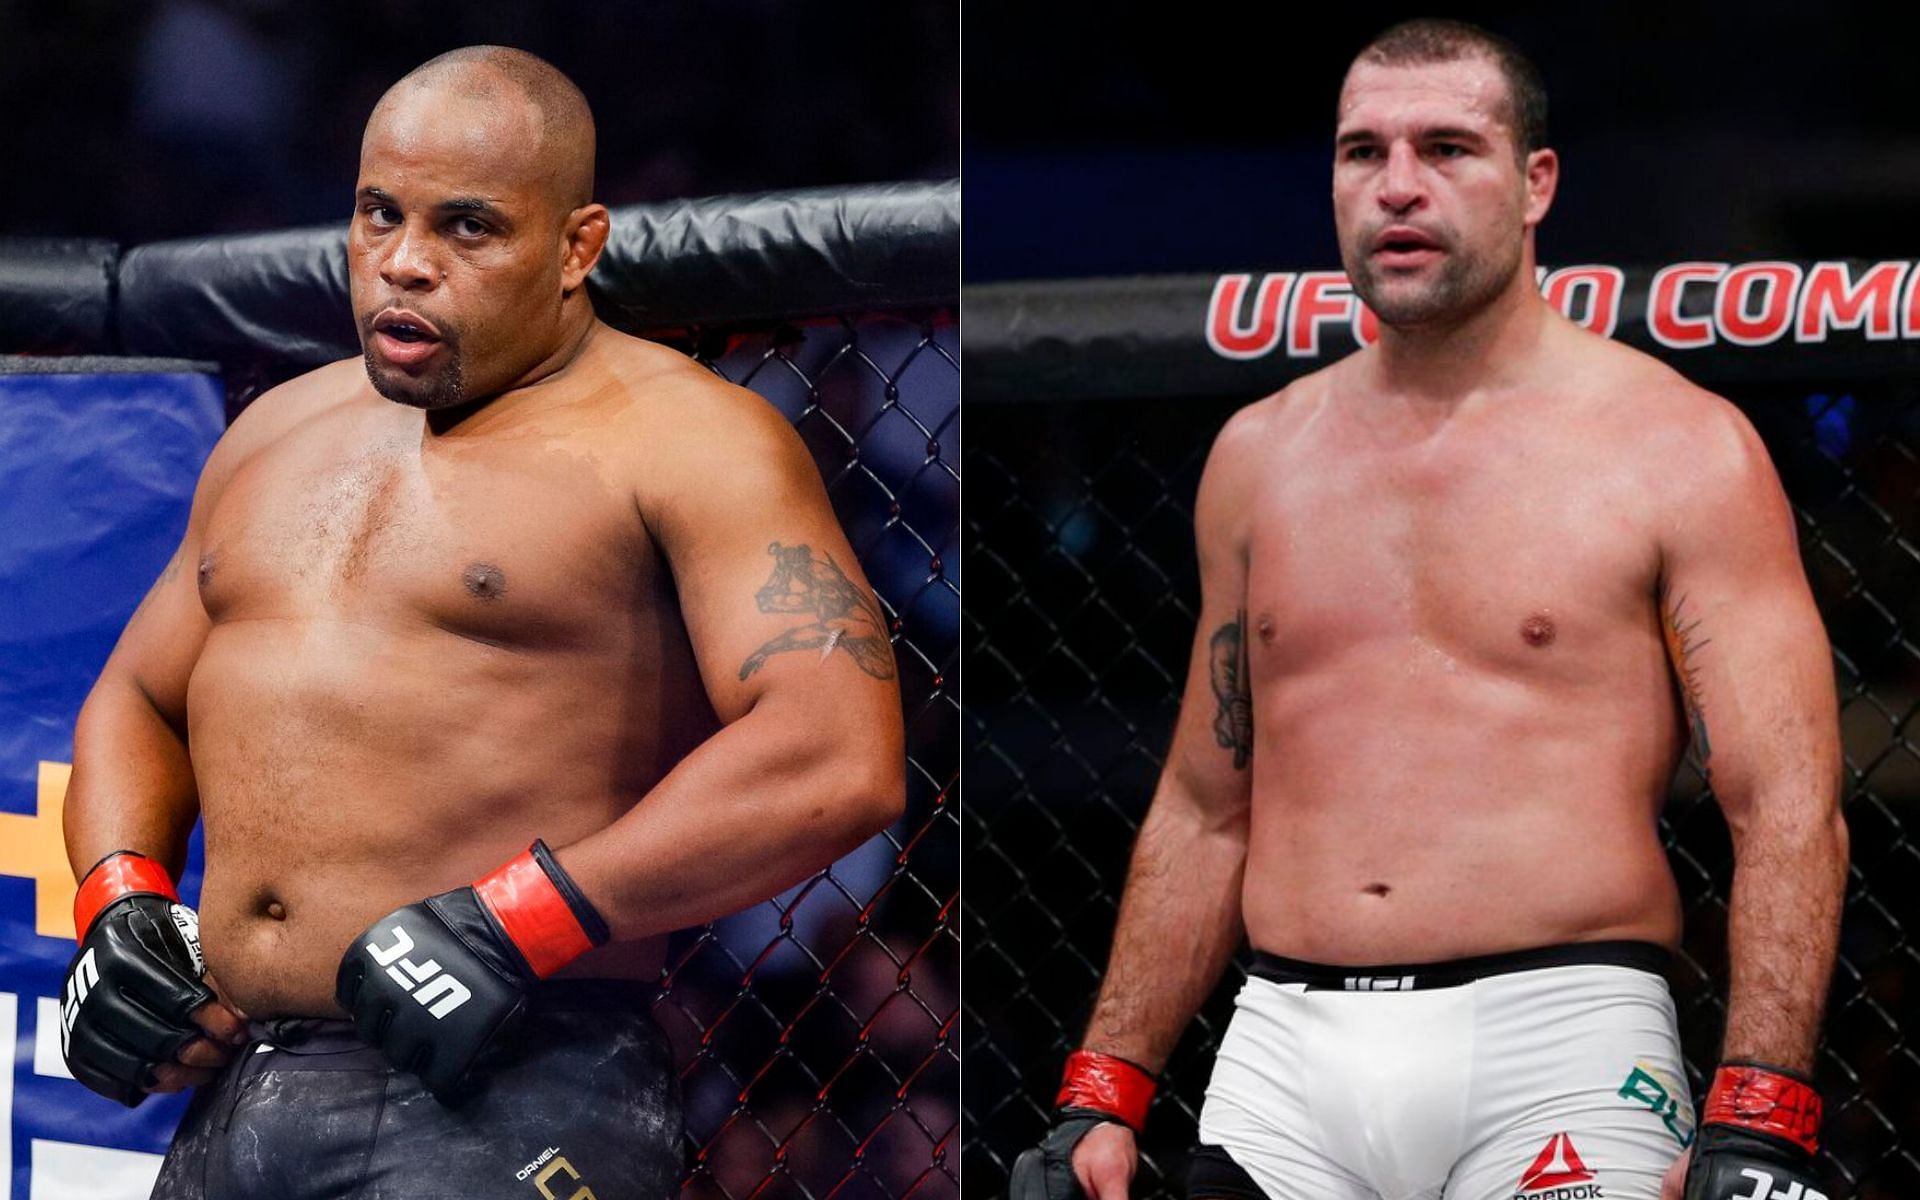 Could Daniel Cormier (left) or Shogun Rua (right) be considered the UFC&#039;s light-heavyweight GOAT?